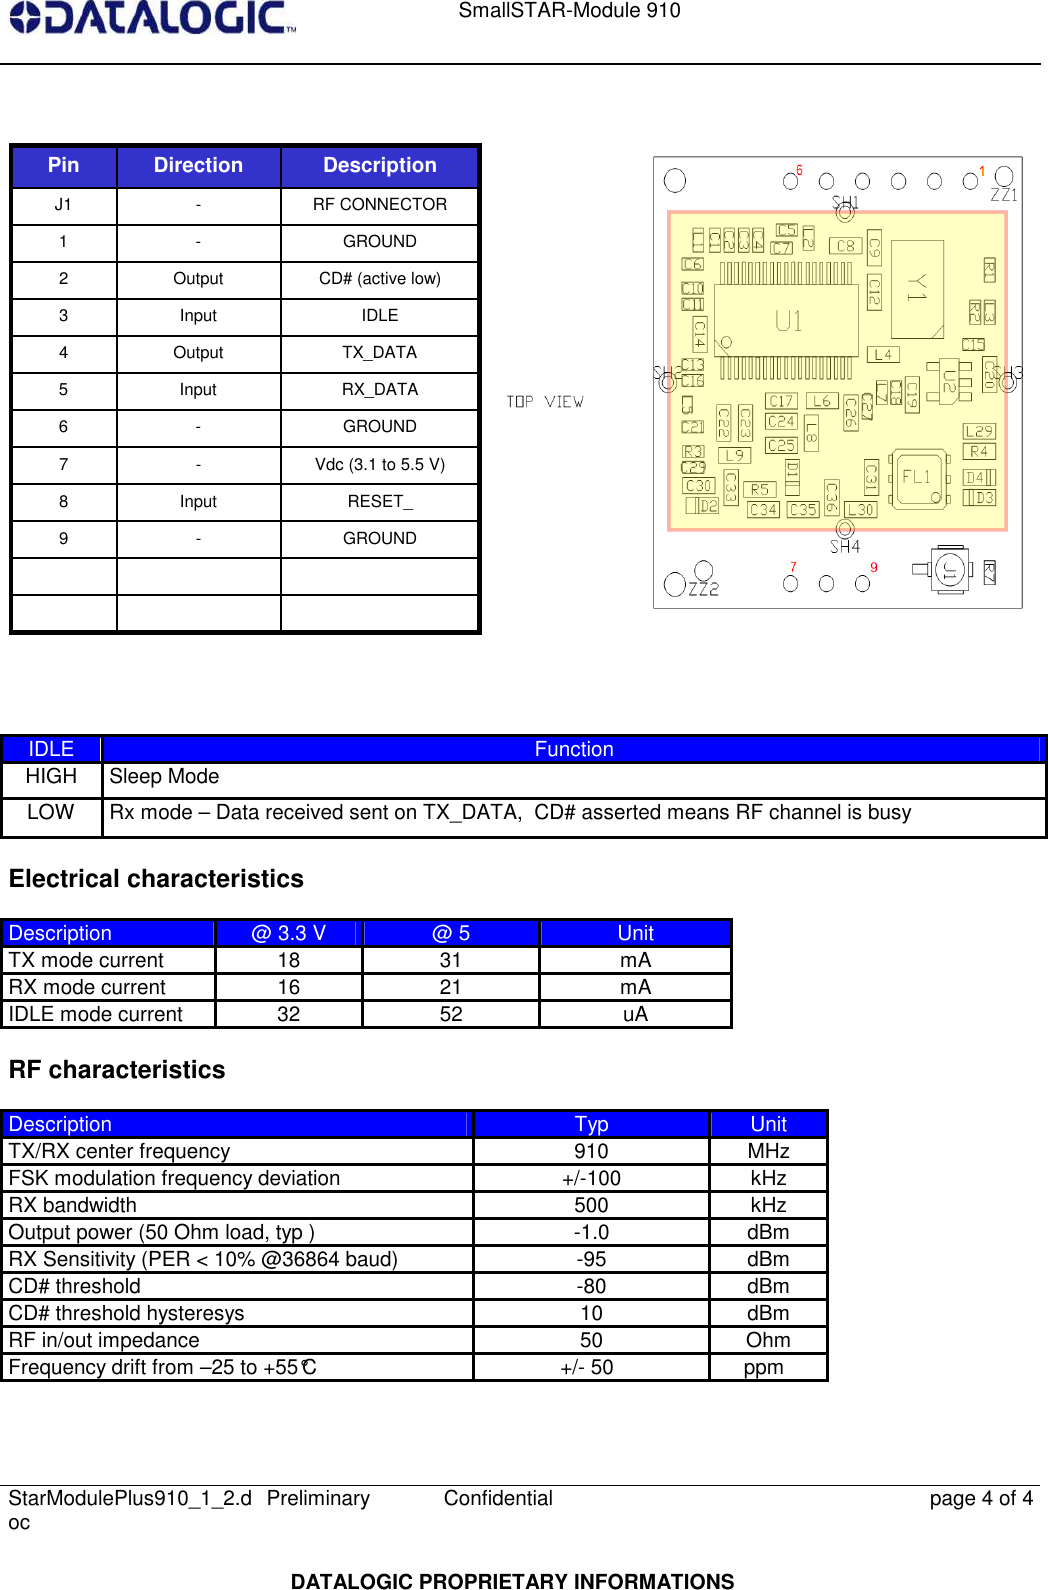    SmallSTAR-Module 910   StarModulePlus910_1_2.doc  Preliminary Confidential  page 4 of 4  DATALOGIC PROPRIETARY INFORMATIONS             IDLE  Function HIGH  Sleep Mode LOW  Rx mode – Data received sent on TX_DATA,  CD# asserted means RF channel is busy Electrical characteristics Description  @ 3.3 V  @ 5  Unit TX mode current  18  31  mA RX mode current  16  21  mA IDLE mode current  32  52  uA RF characteristics Description   Typ  Unit TX/RX center frequency  910  MHz FSK modulation frequency deviation  +/-100  kHz RX bandwidth  500  kHz Output power (50 Ohm load, typ )  -1.0  dBm RX Sensitivity (PER &lt; 10% @36864 baud)  -95  dBm CD# threshold  -80  dBm CD# threshold hysteresys  10  dBm RF in/out impedance  50  Ohm Frequency drift from –25 to +55°C  +/- 50  ppm  RF CONNECTOR - J1       GROUND  - 9 RESET_ Input 8 Vdc (3.1 to 5.5 V)  - 7 GROUND - 6 RX_DATA Input 5 TX_DATA  Output 4 IDLE Input 3 CD# (active low)  Output 2 GROUND - 1 Description Direction Pin 